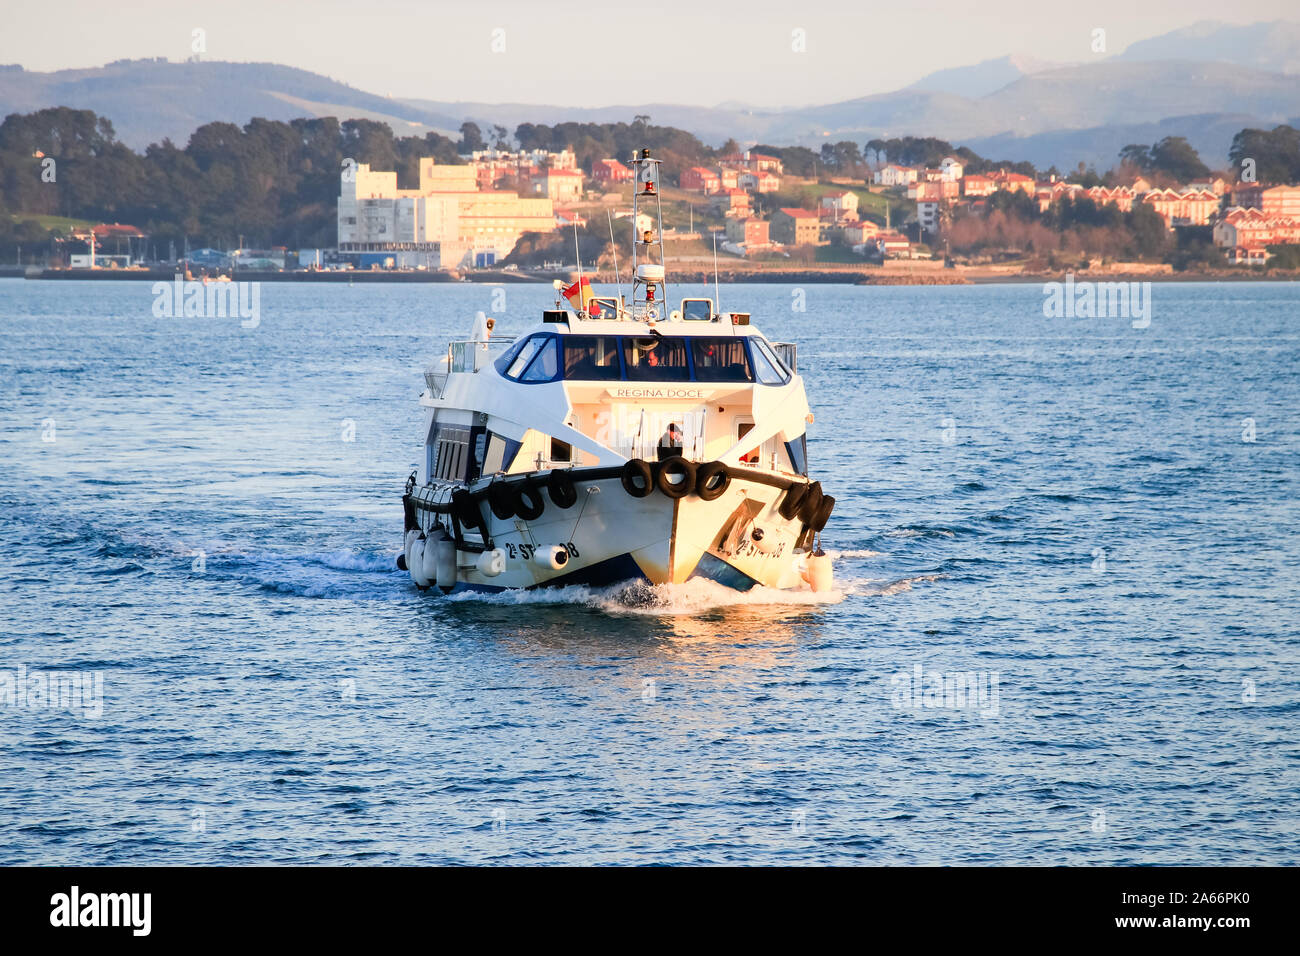 SANTANDER, SPAIN - February 21, 2017: Ferry approaching to Santander pier Stock Photo